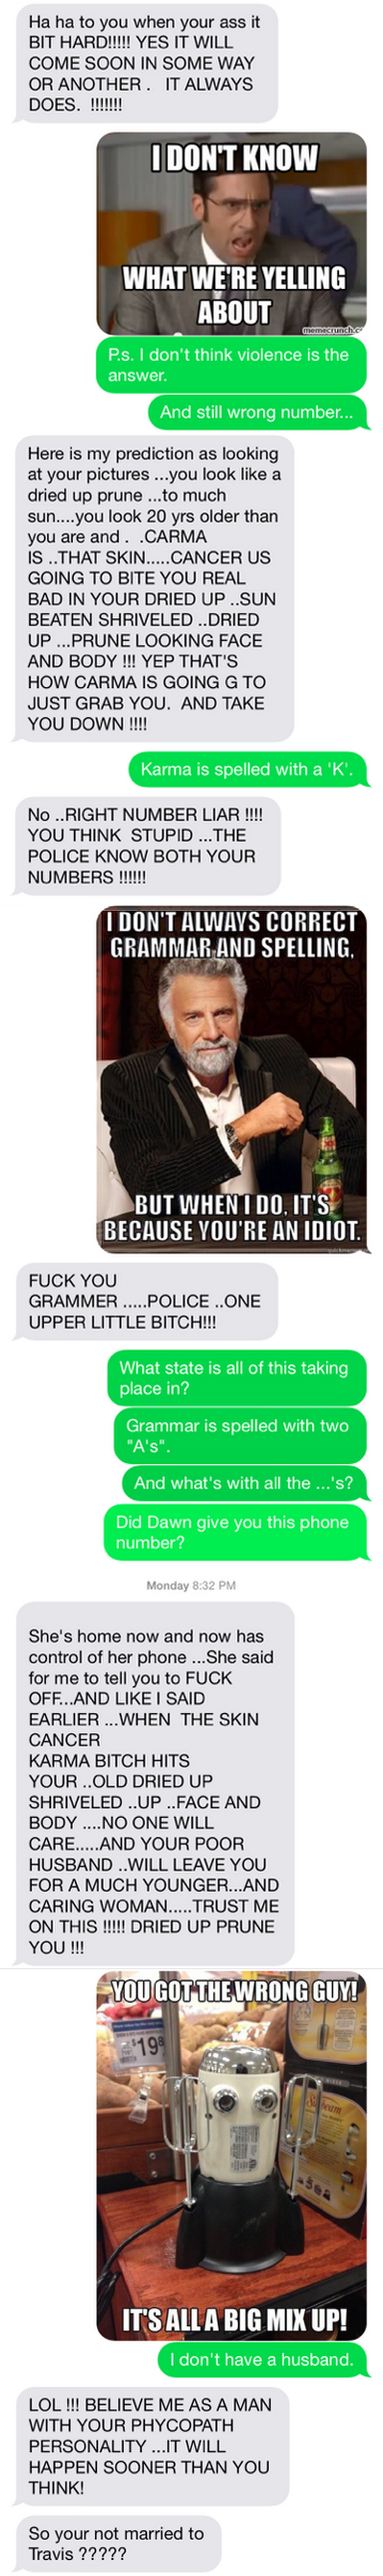 Funny Wrong Number Text Trolling